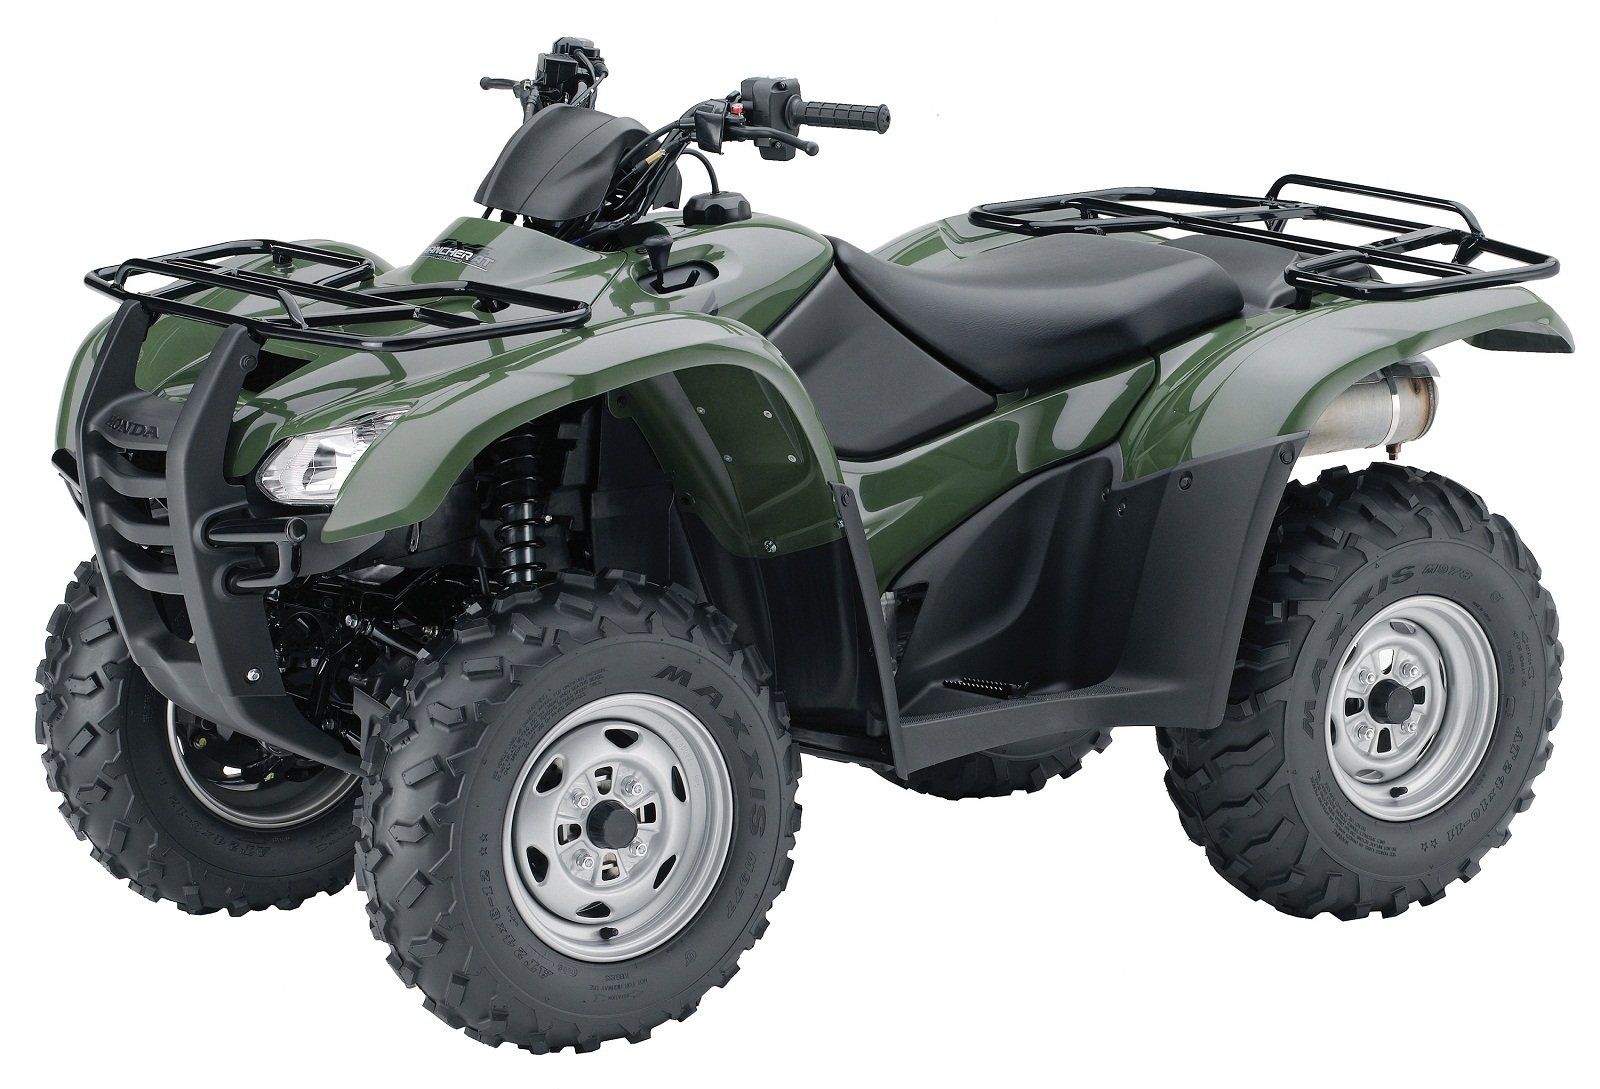 Honda FourTrax Rancher AT With Electric Power Steering Picture, Photo, Wallpaper